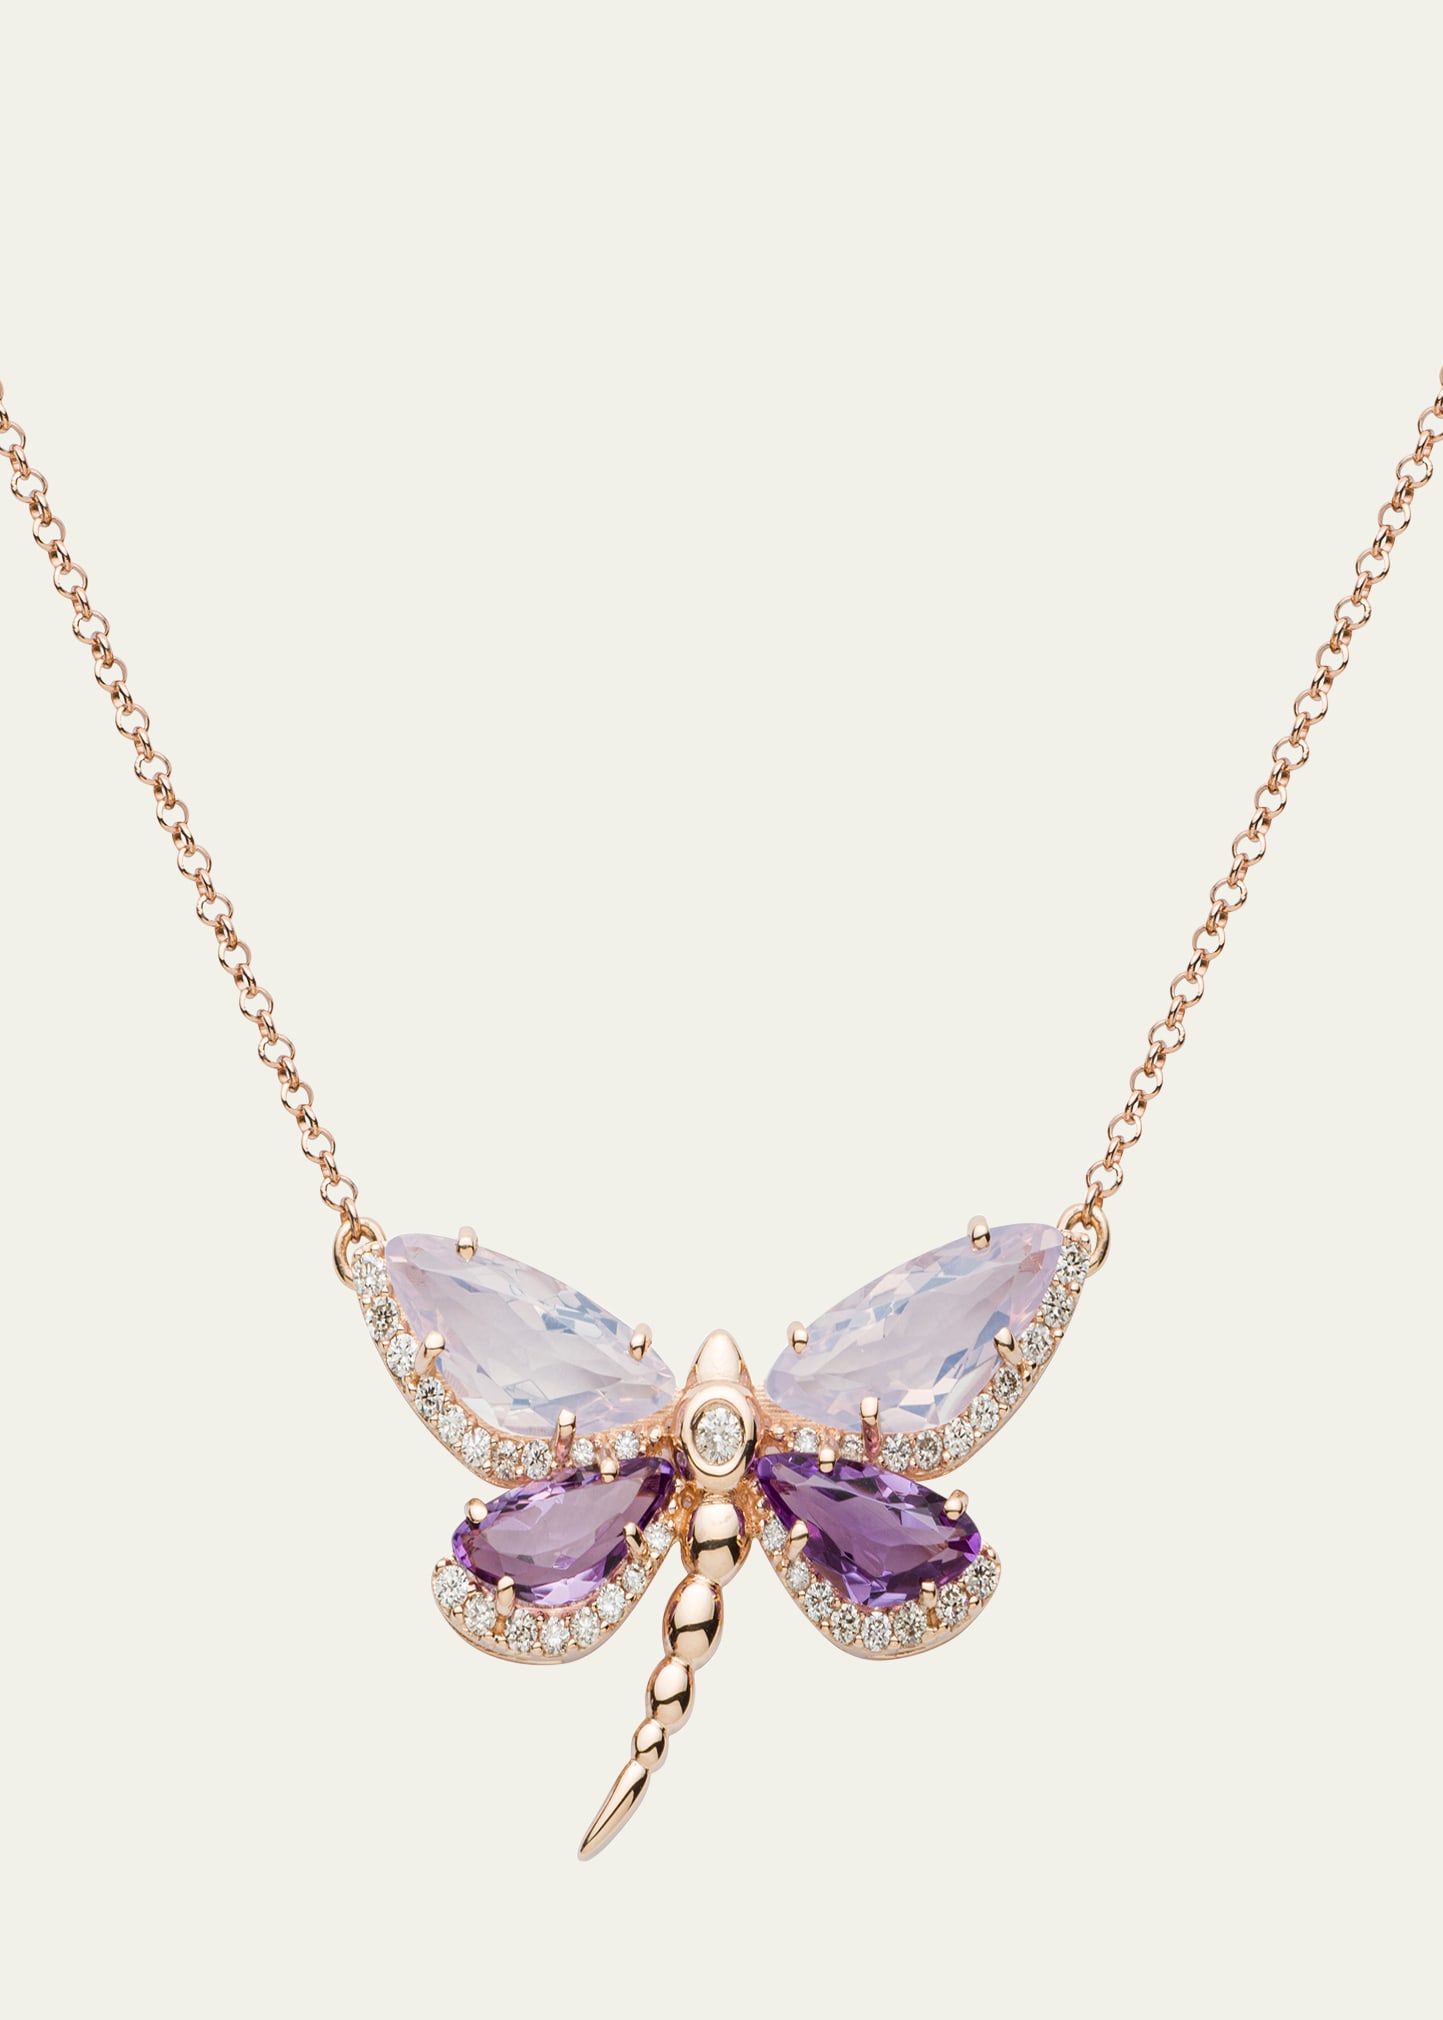 Amethyst and Quartz Dragonfly Necklace with Diamonds